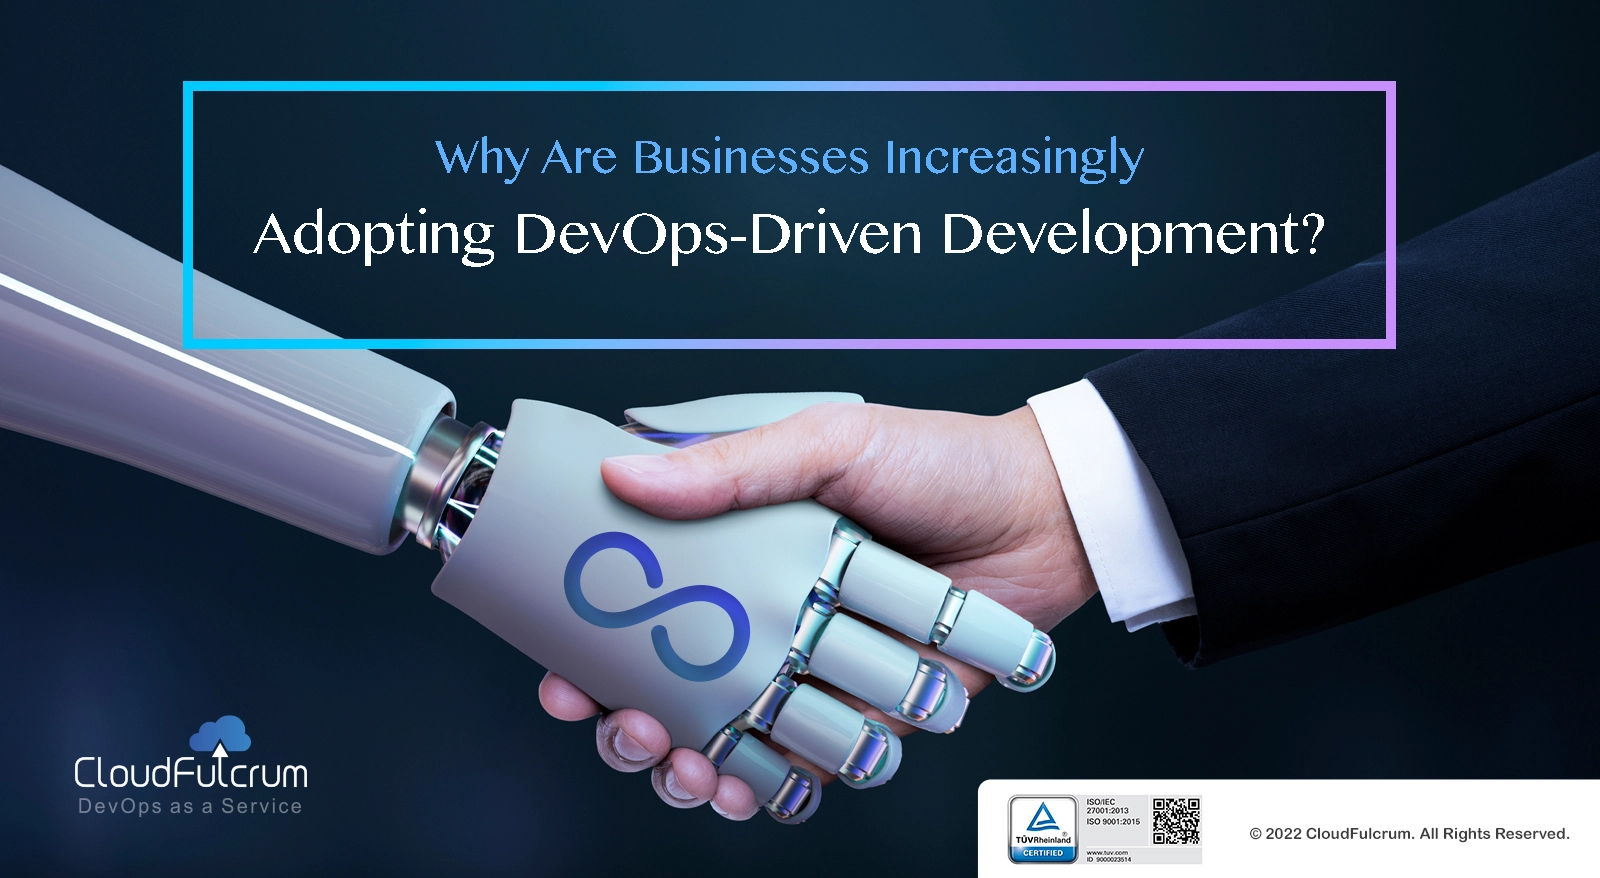 Why Are Businesses Increasingly Adopting DevOps-Driven Development?